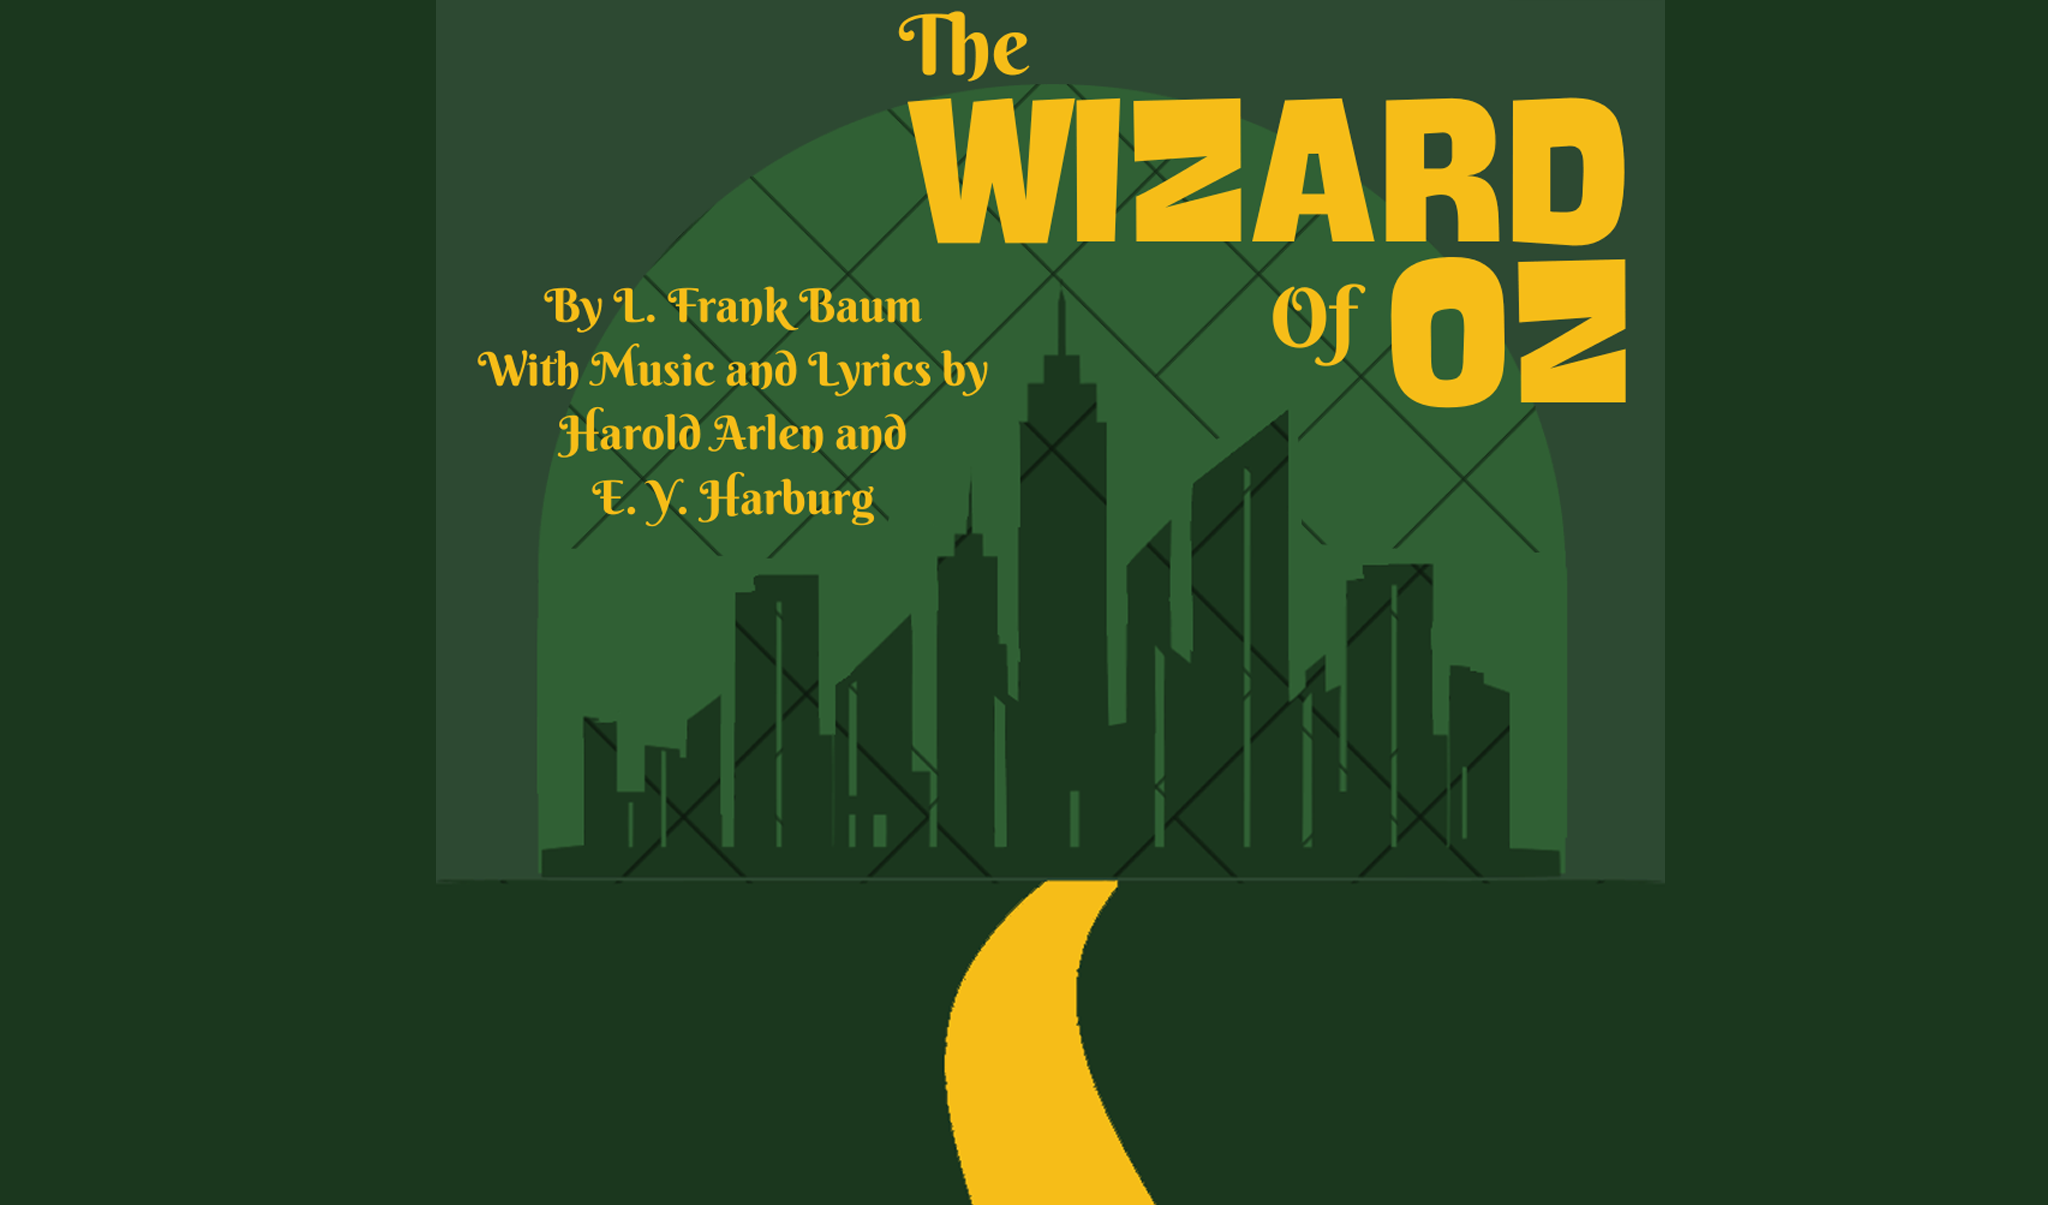 Featured image for “The Wizard of Oz”